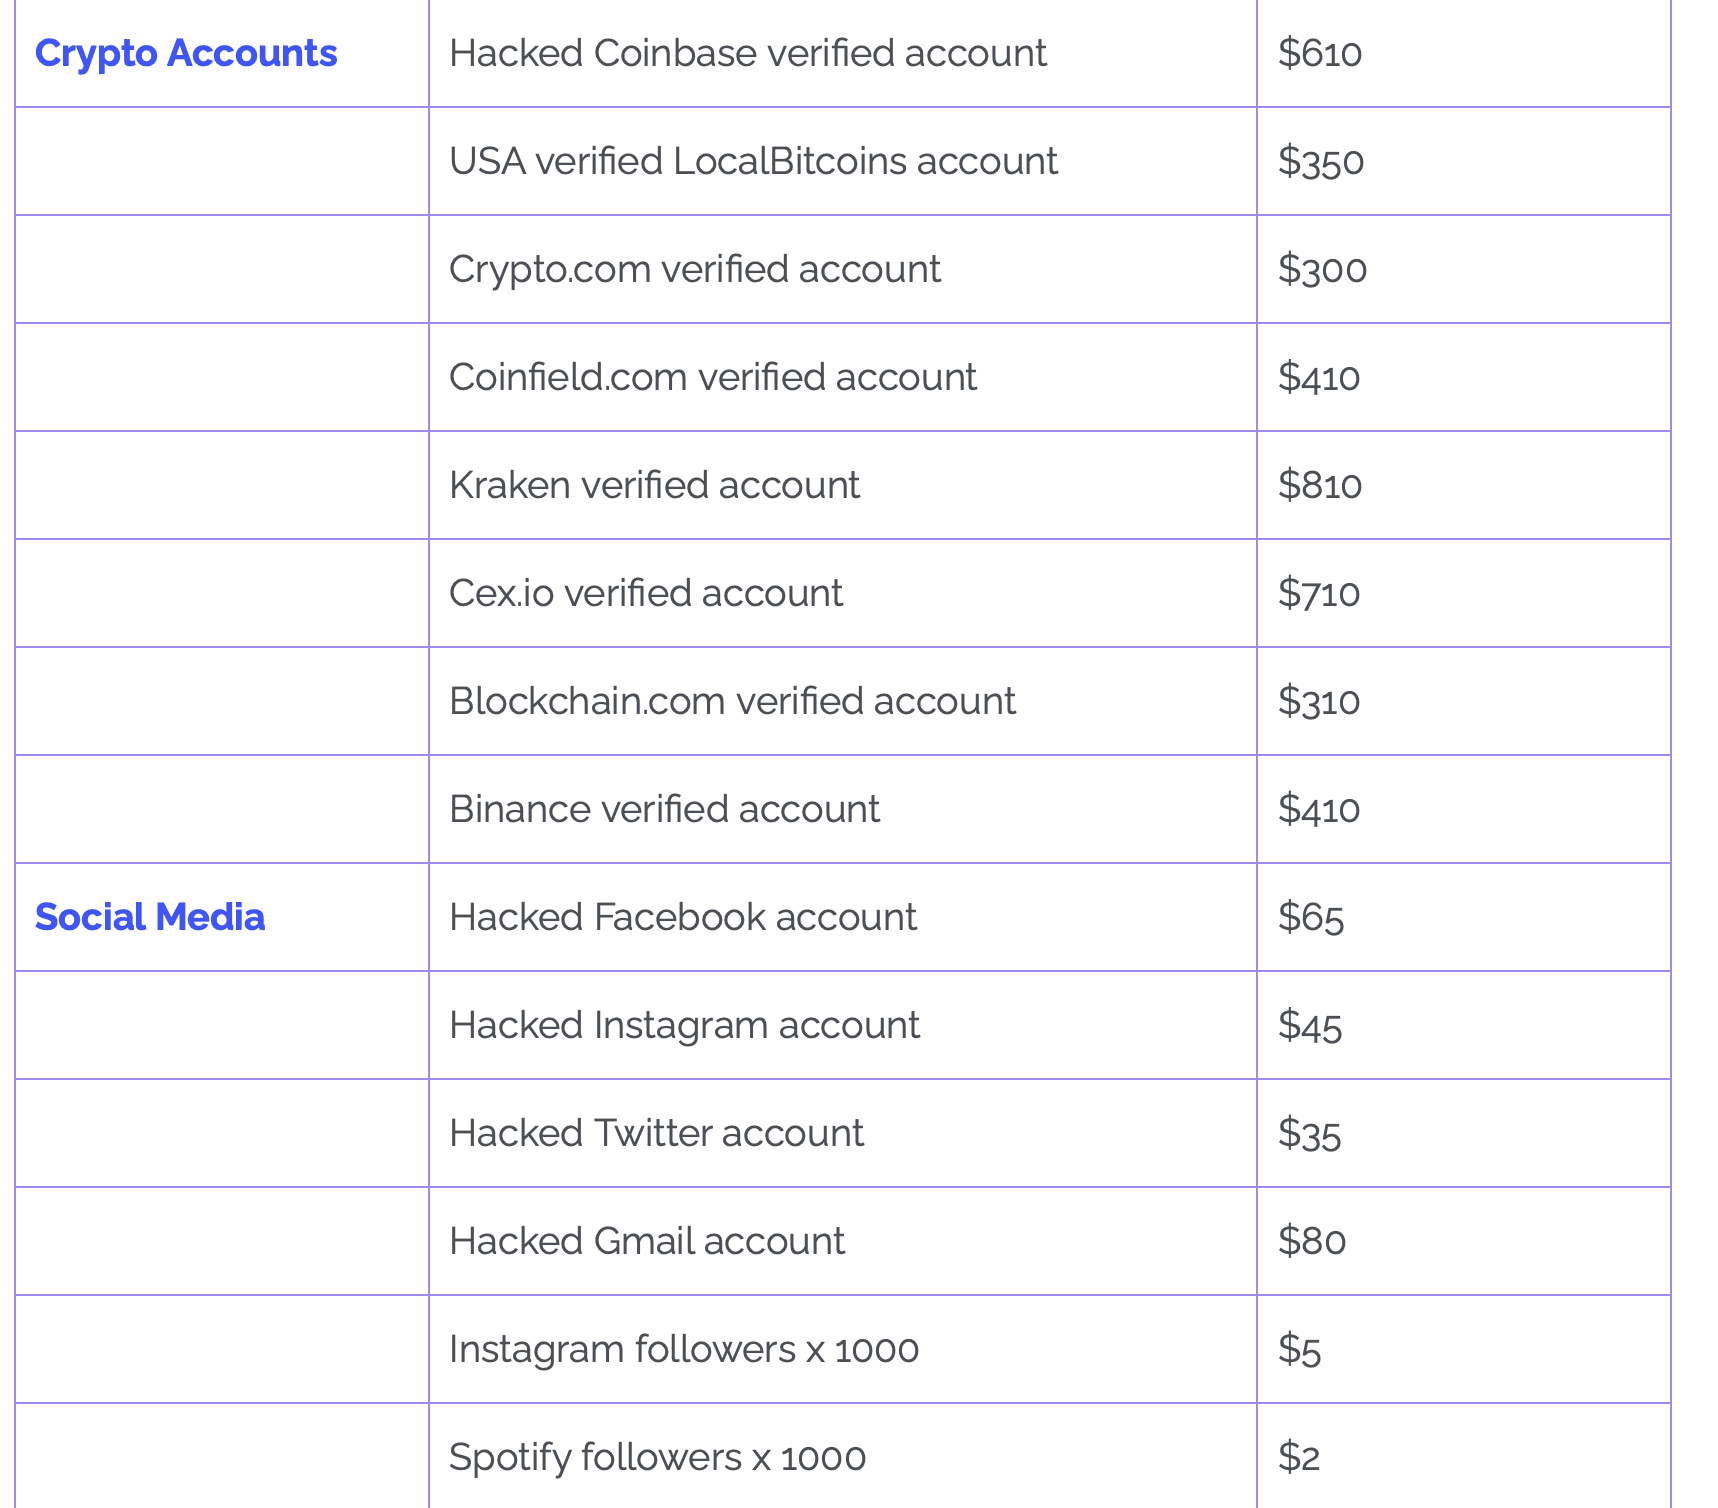 Crypto accounts, verified and hacked for sale, along with Social Media hacked account for sale